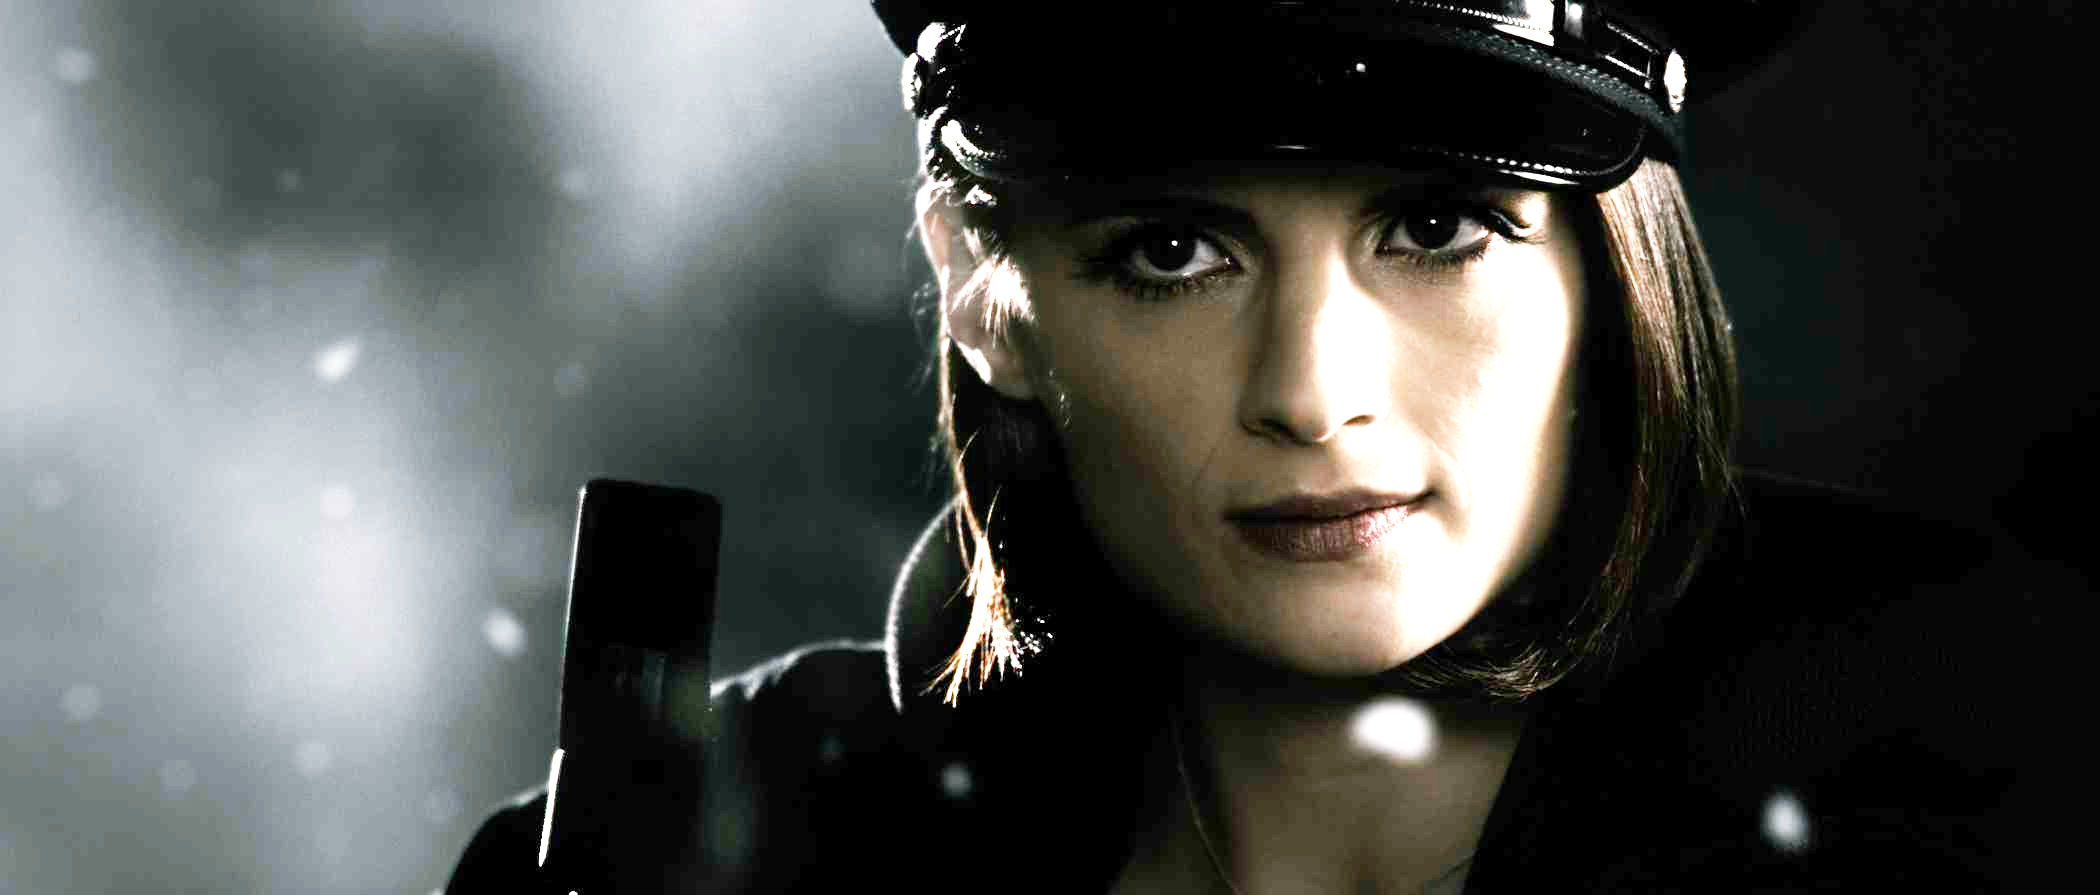 Stana Katic stars as Morgenstern in Lions Gate Films' The Spirit (2008...